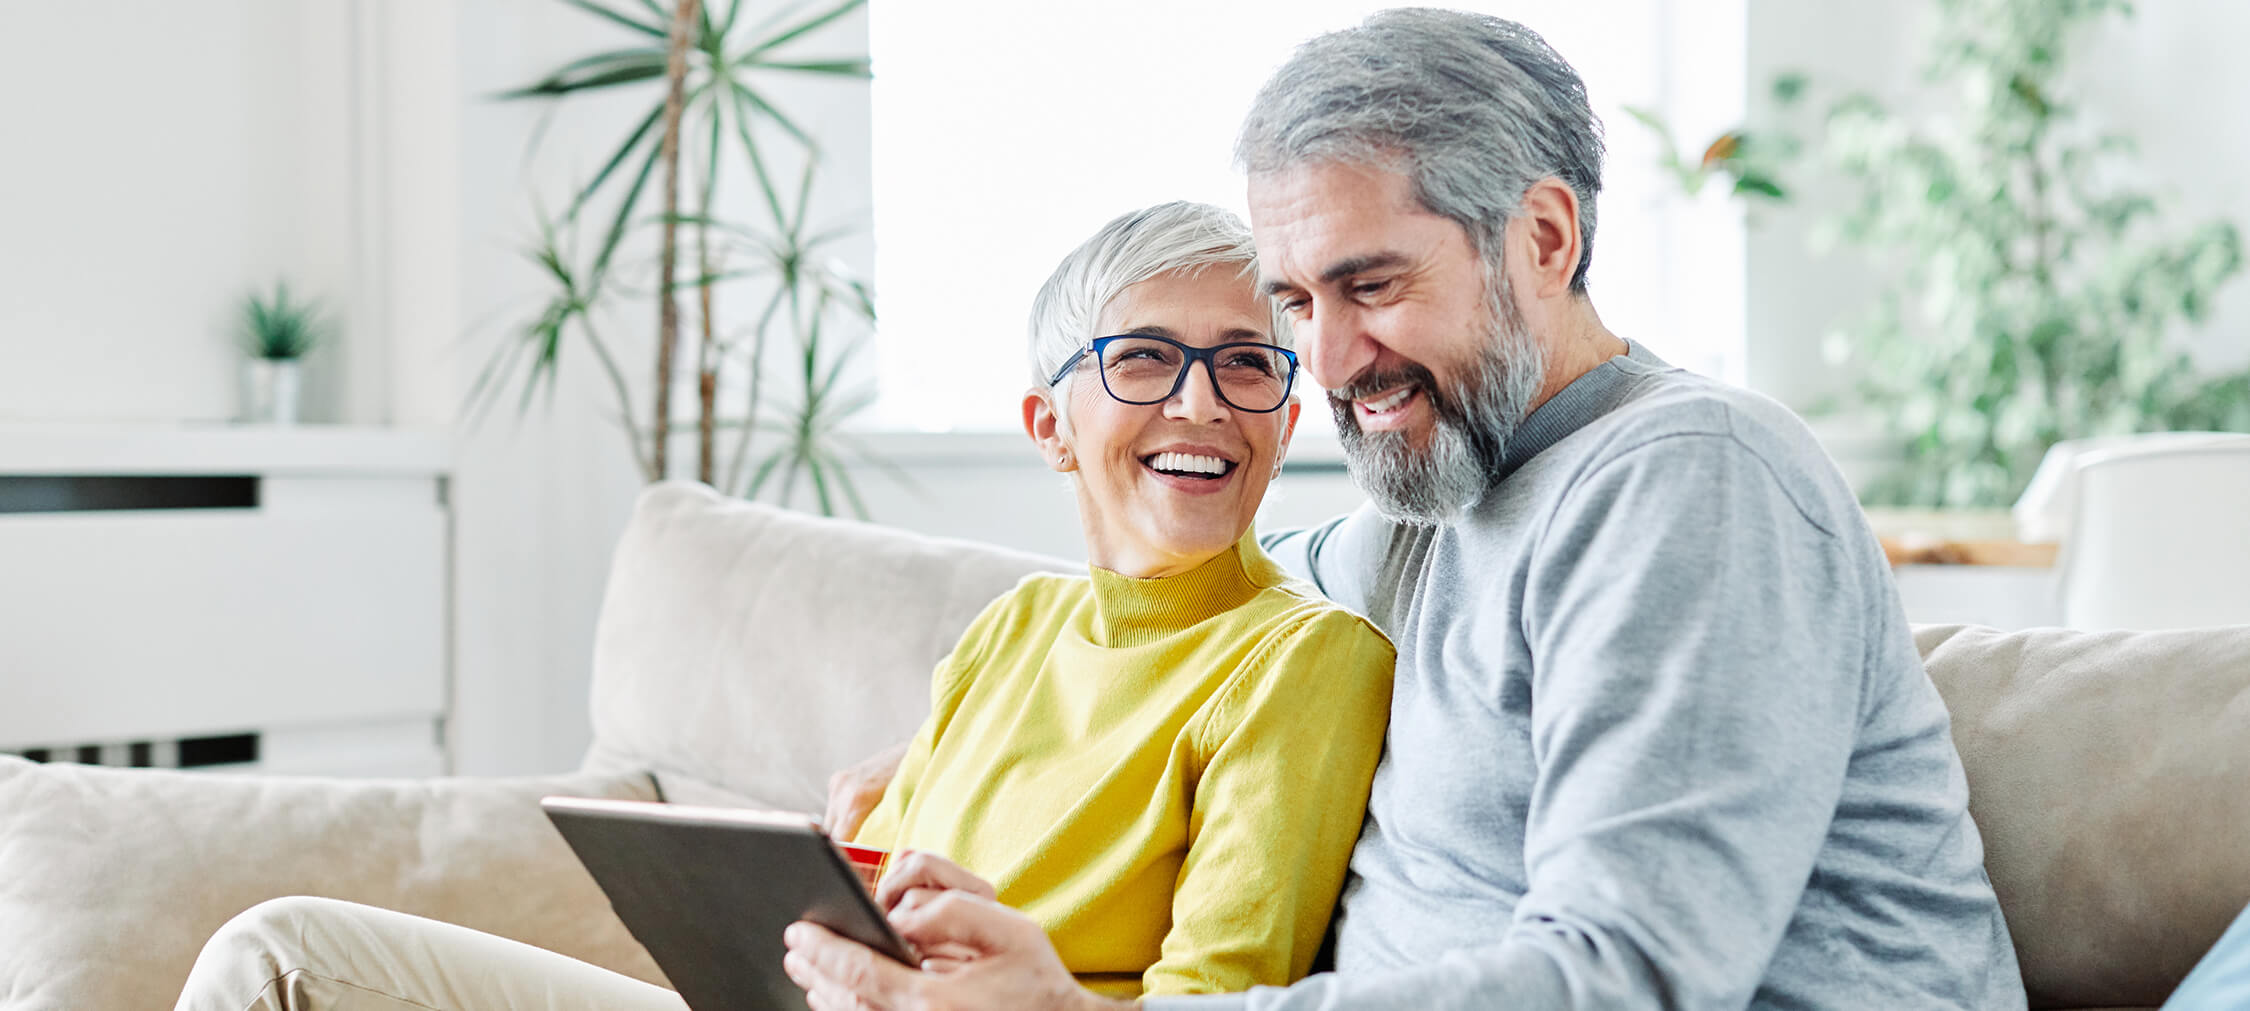 Portrait of happy smiling senior couple using tablet at home.